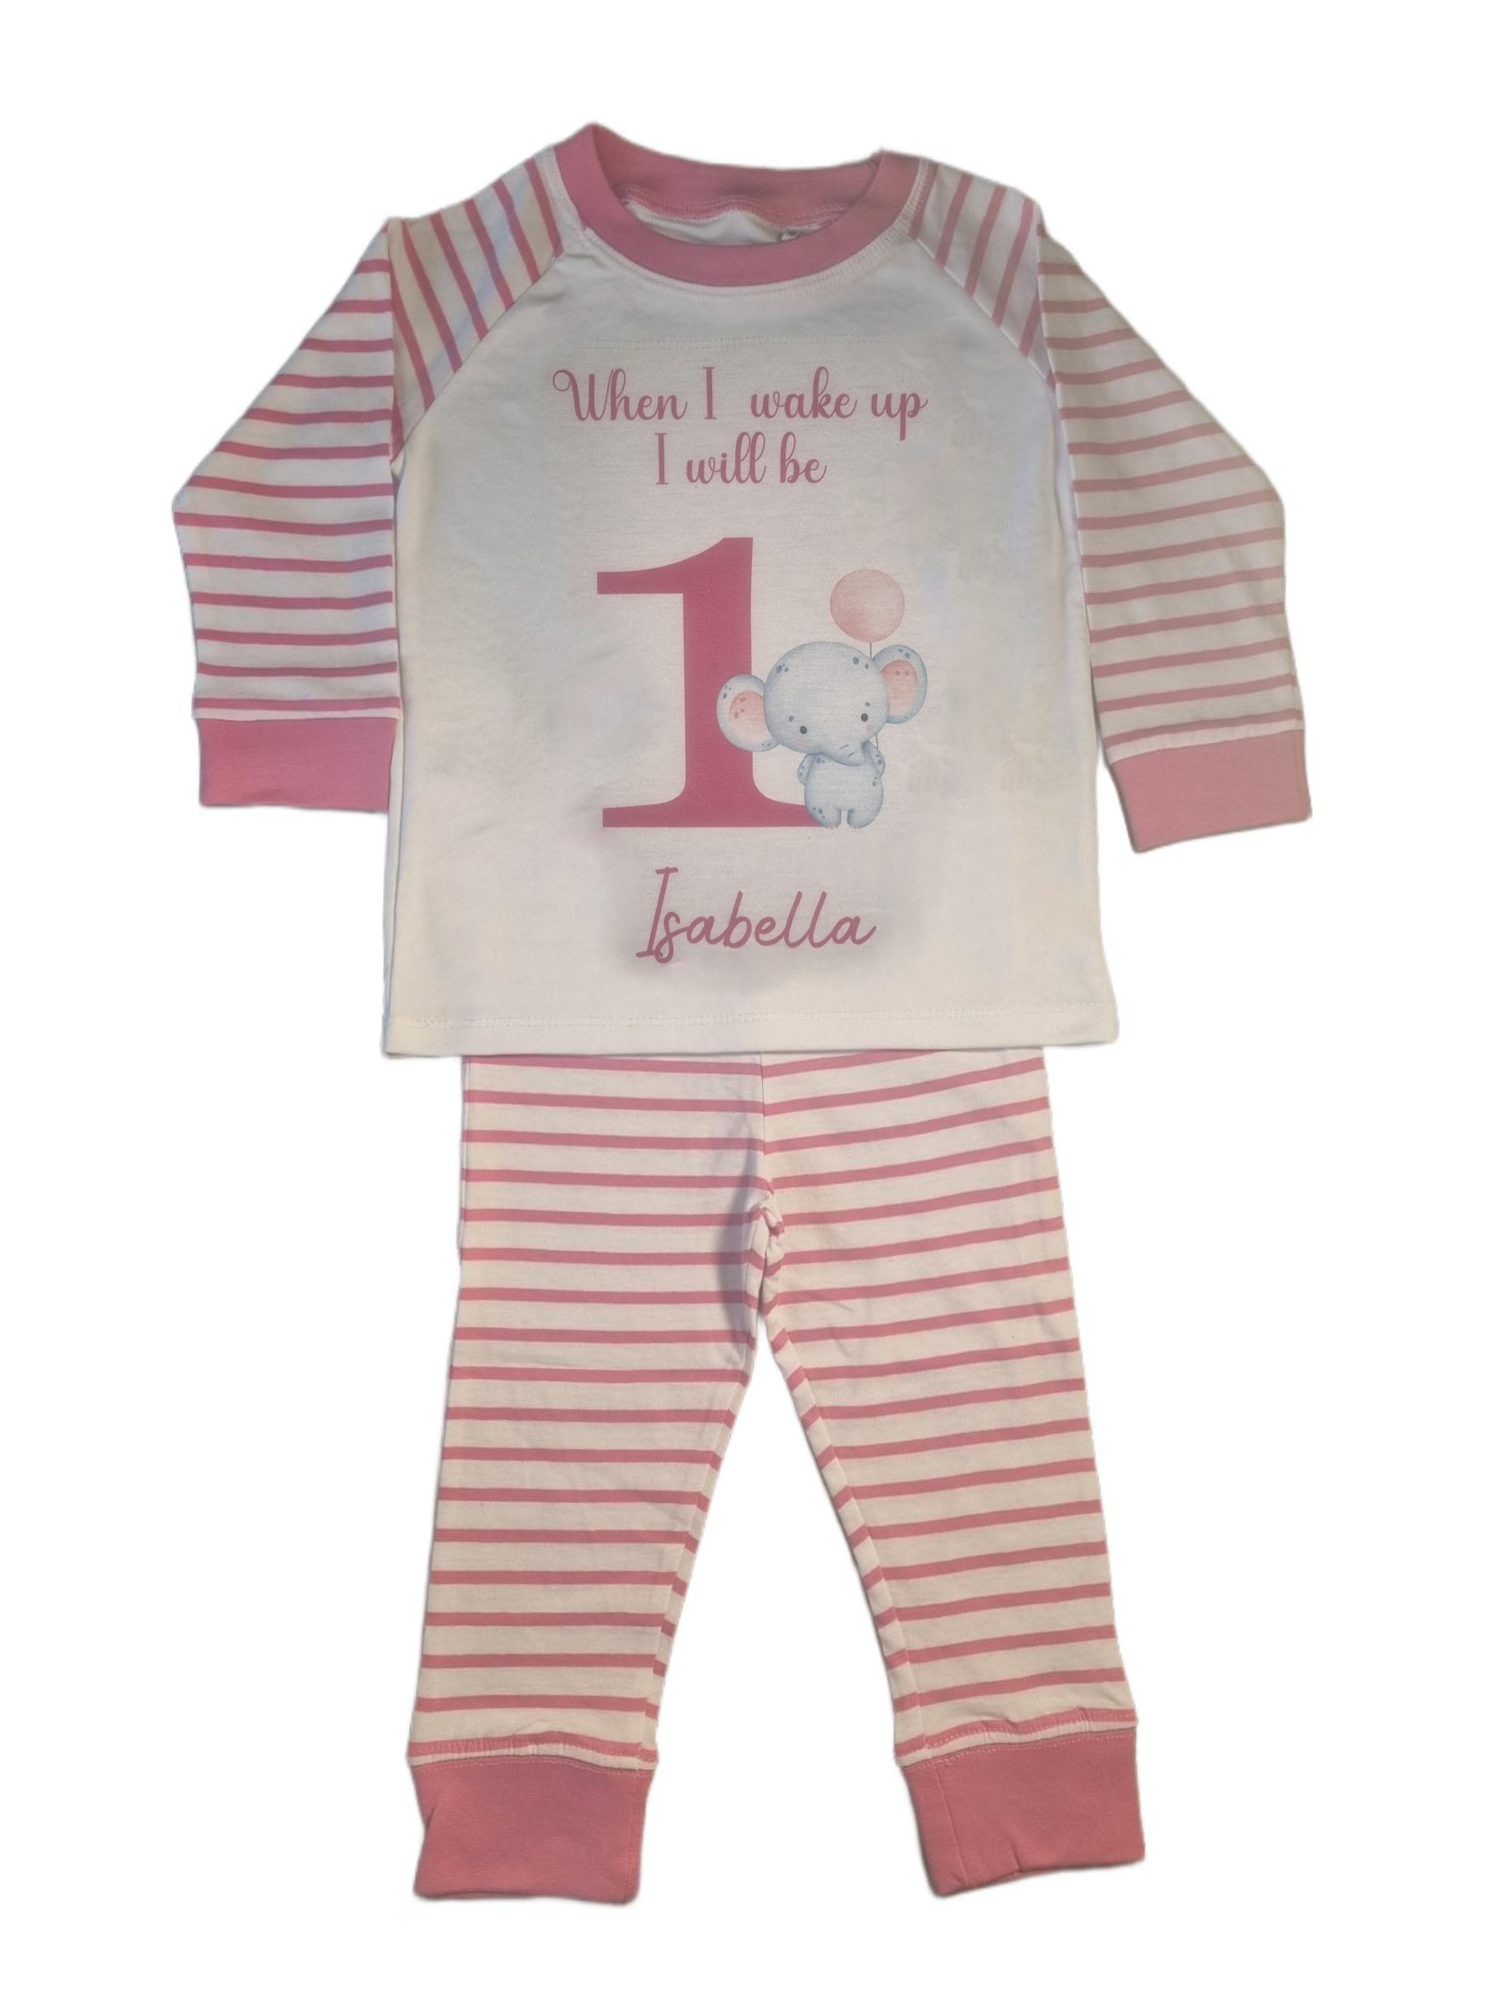 'When I wake up I will be' 1 pink and white stripe pyjamas with elephant holding pink balloon, includes child's name, flat top and bottoms